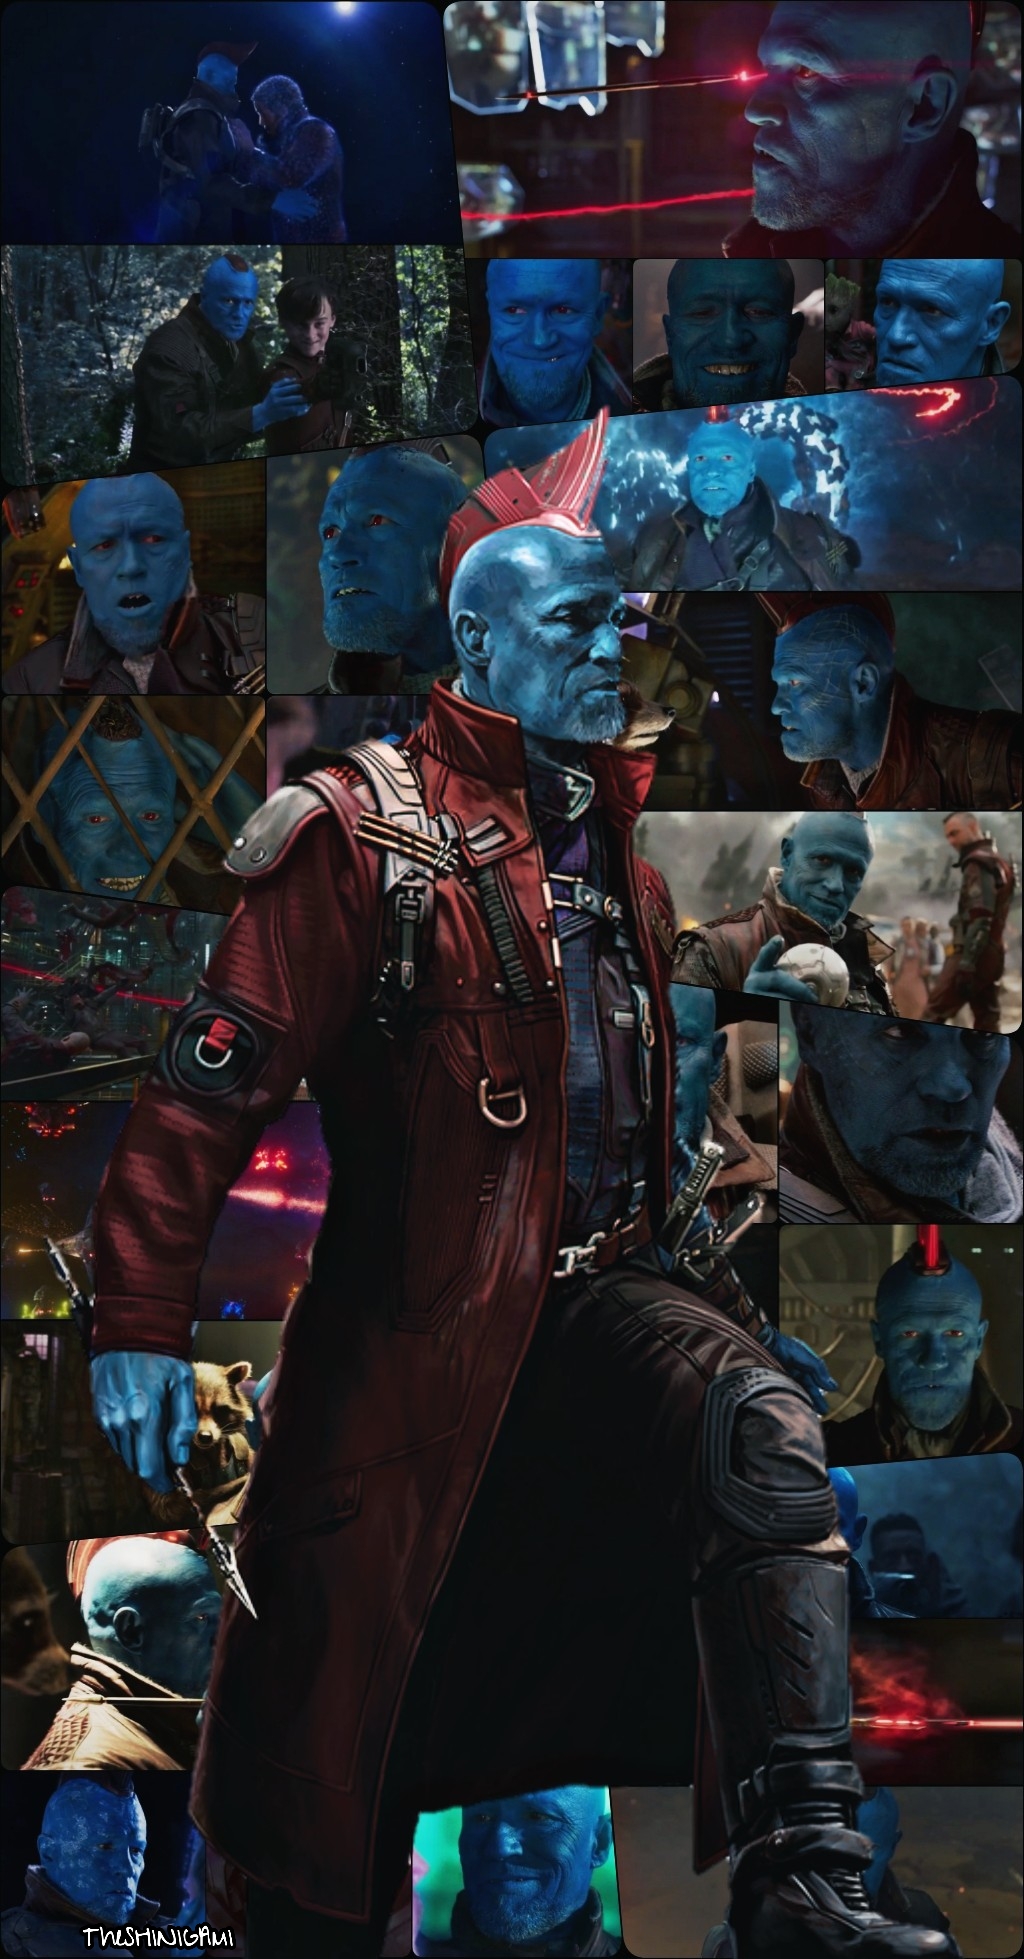 Yondu Udonta Guardians Of The Galaxy Wallpapers